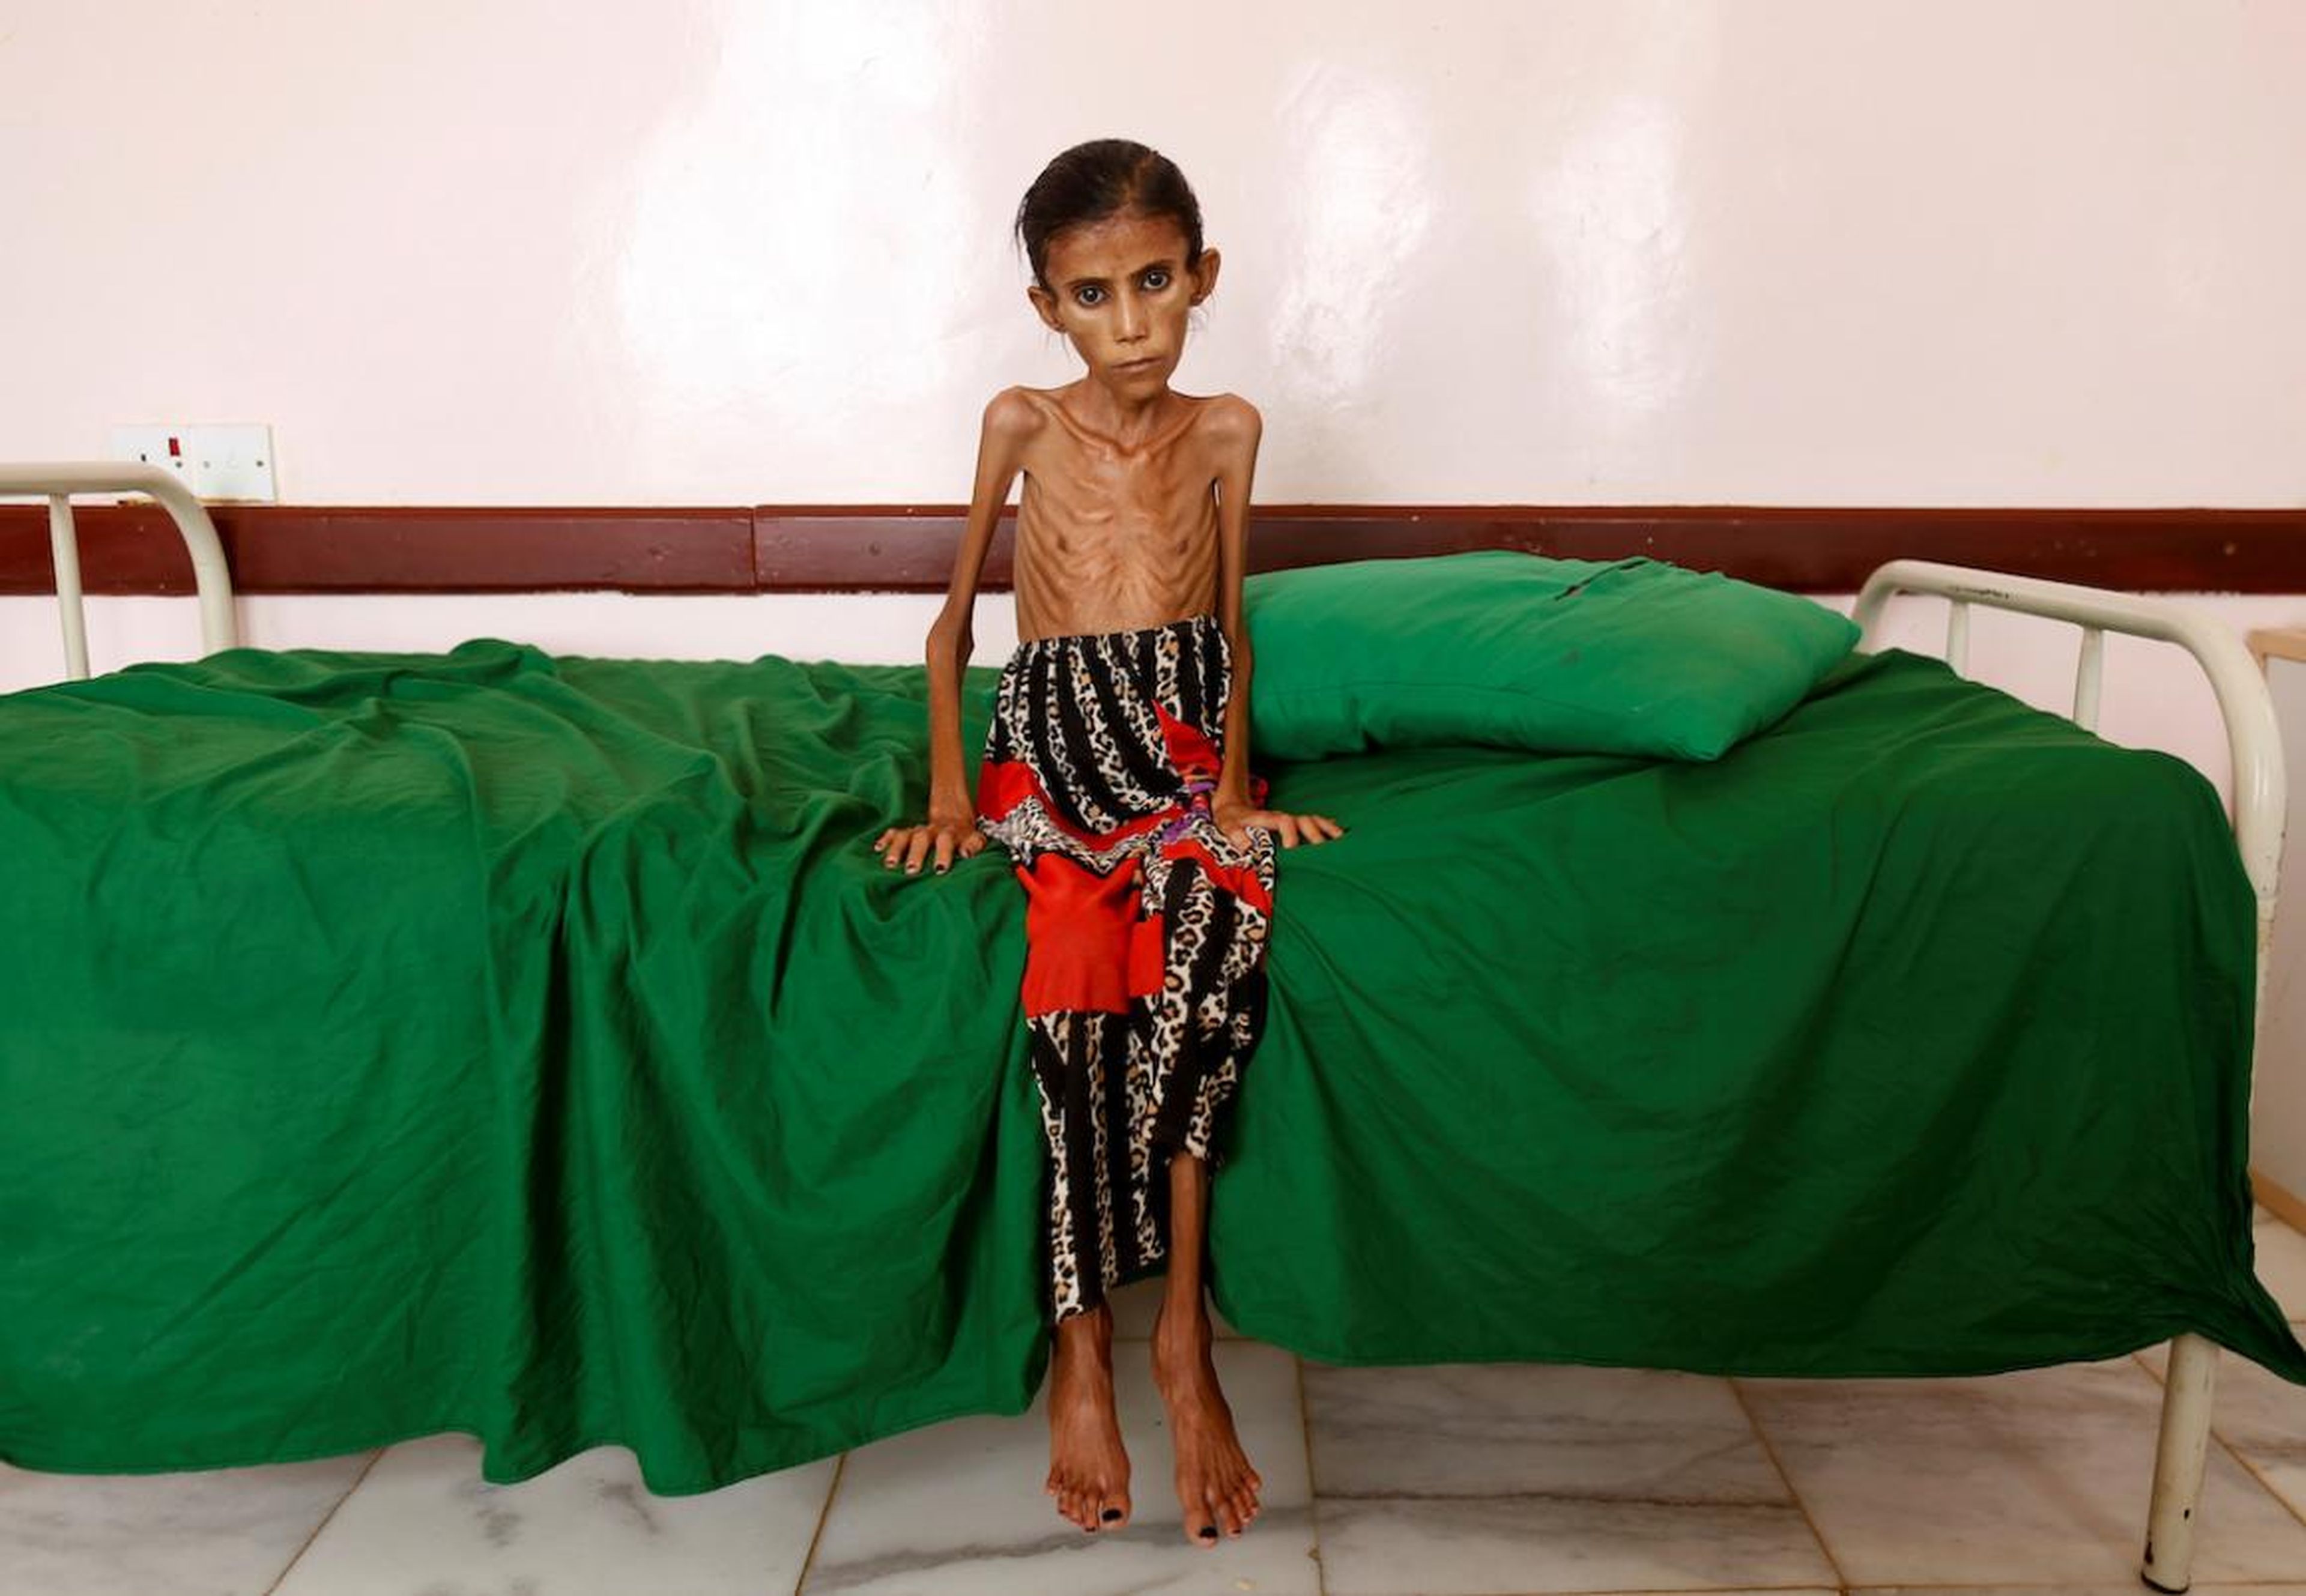 Fatima Ibrahim Hadi, 12, who is malnourished and weighs just 22 pounds, sits on a bed at a clinic in Aslam, in the northwestern province of Hajjah, Yemen, on February 17.